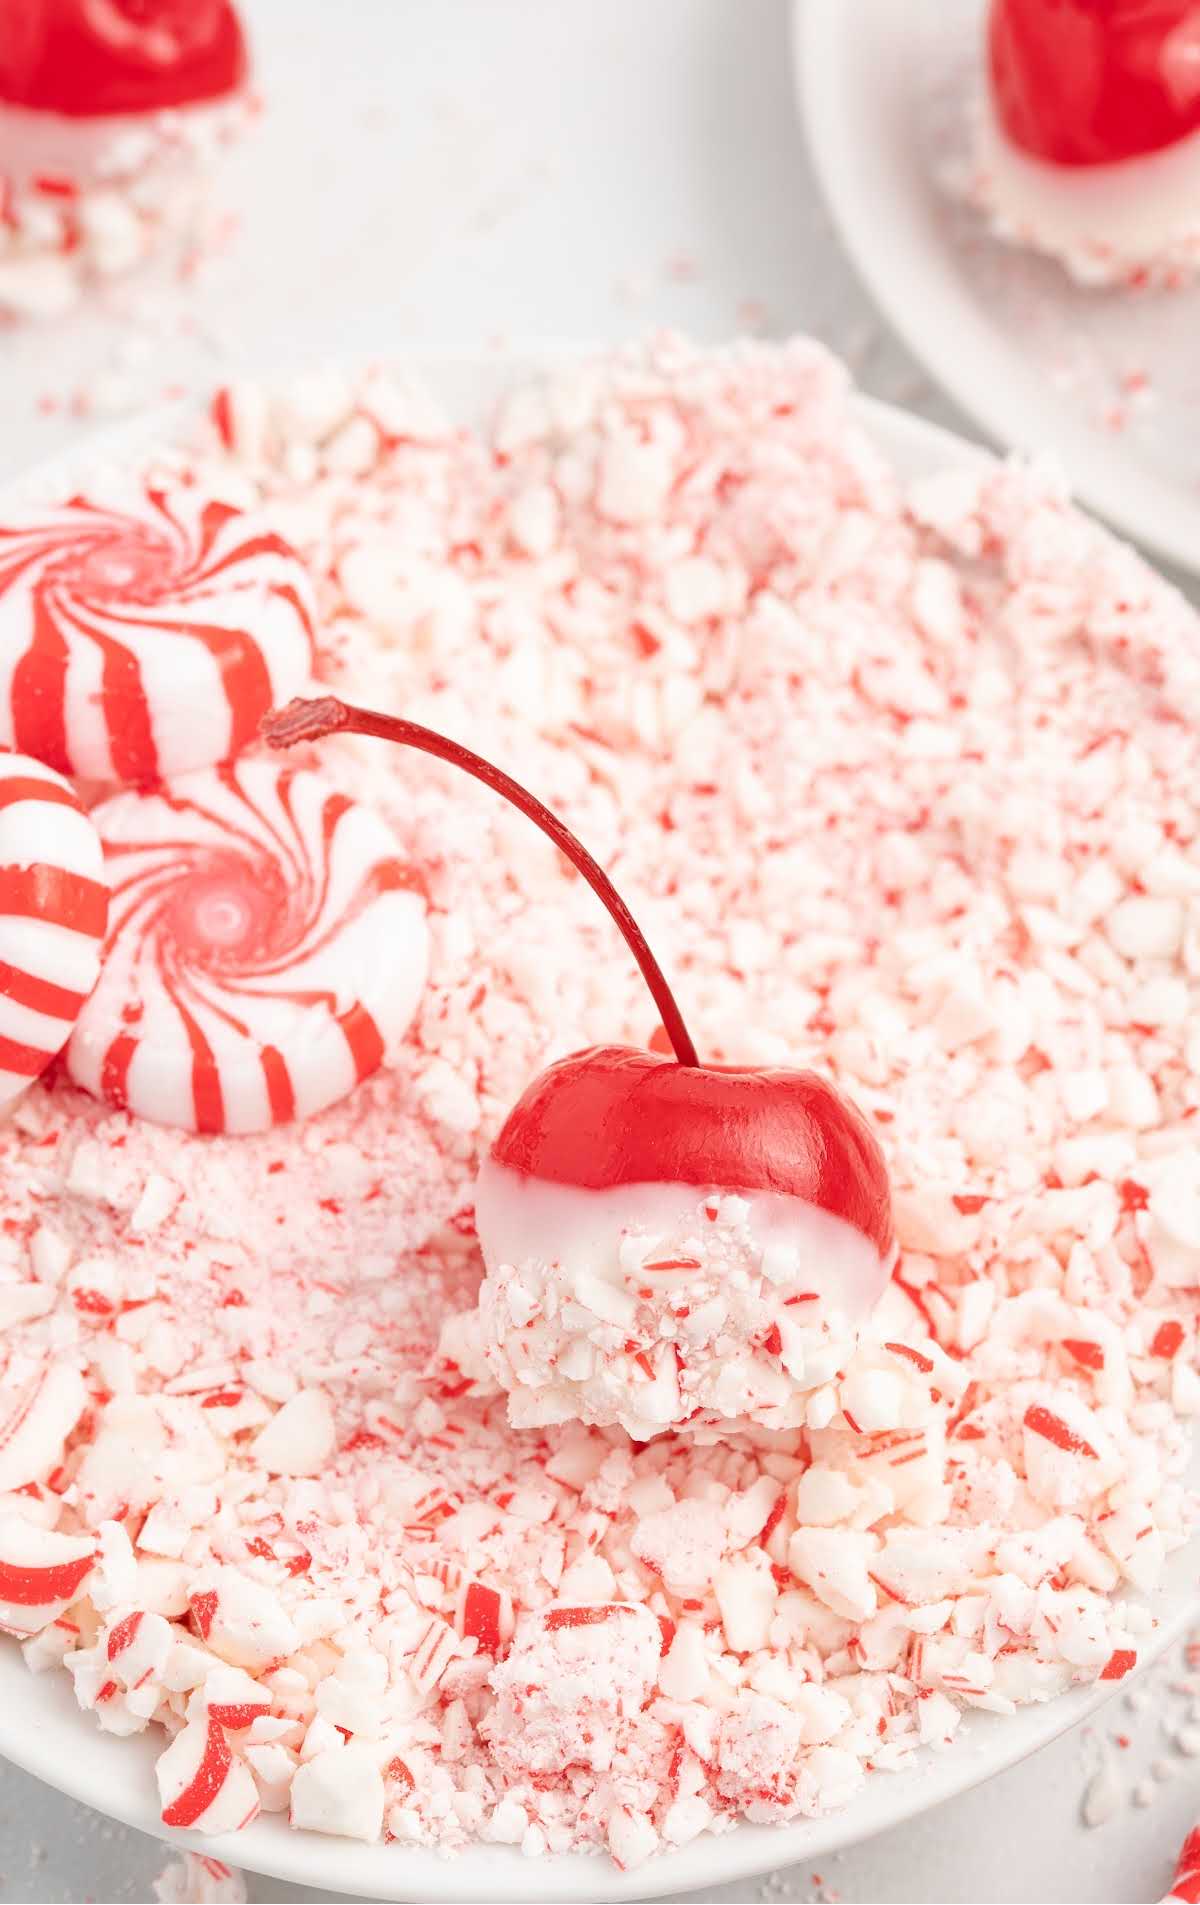 a close upshot of a cherry bomb on a plate filled with peppermint